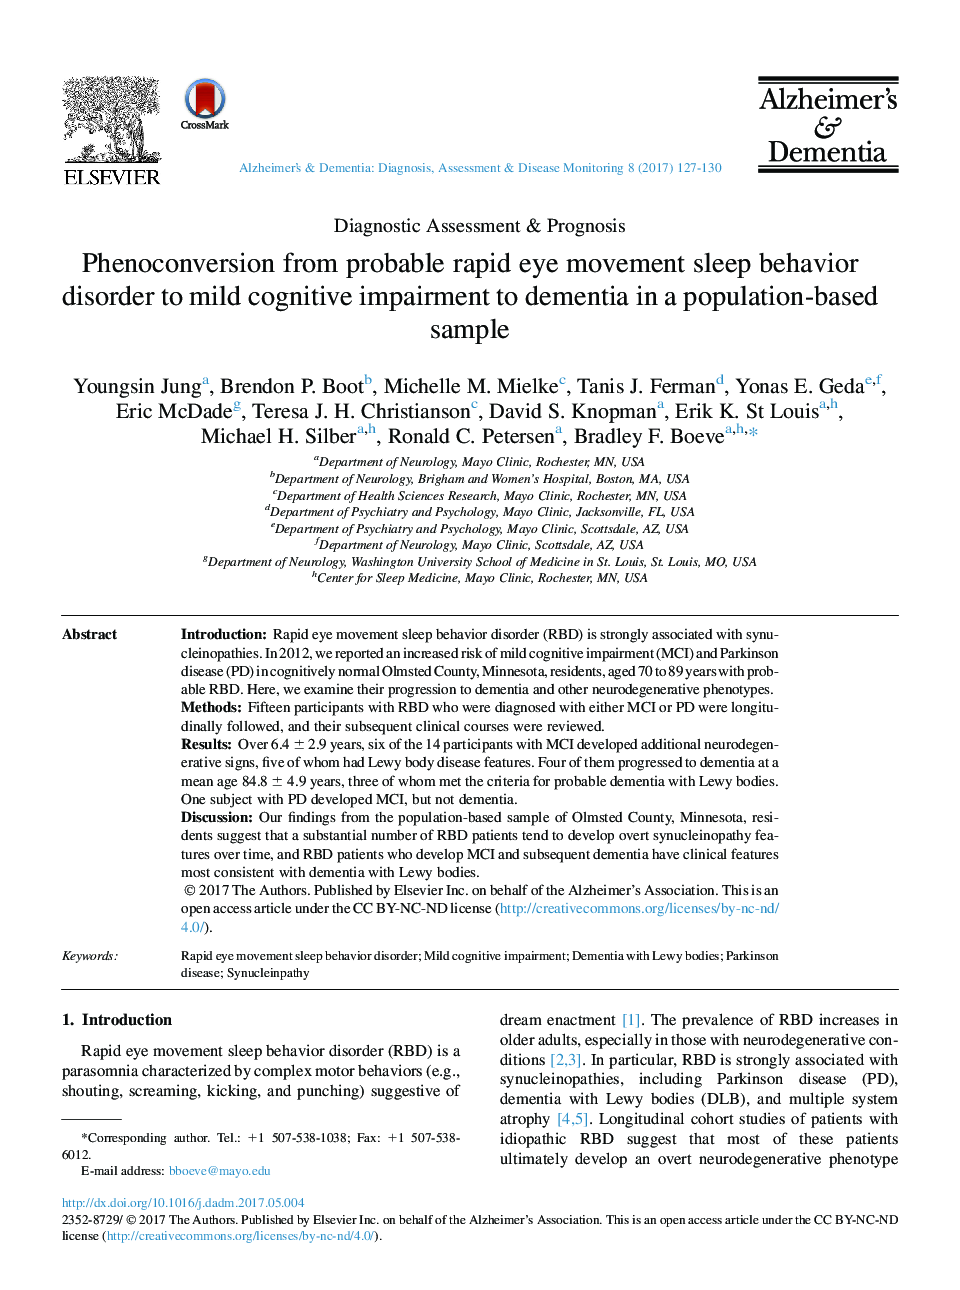 Phenoconversion from probable rapid eye movement sleep behavior disorder to mild cognitive impairment to dementia in a population-based sample